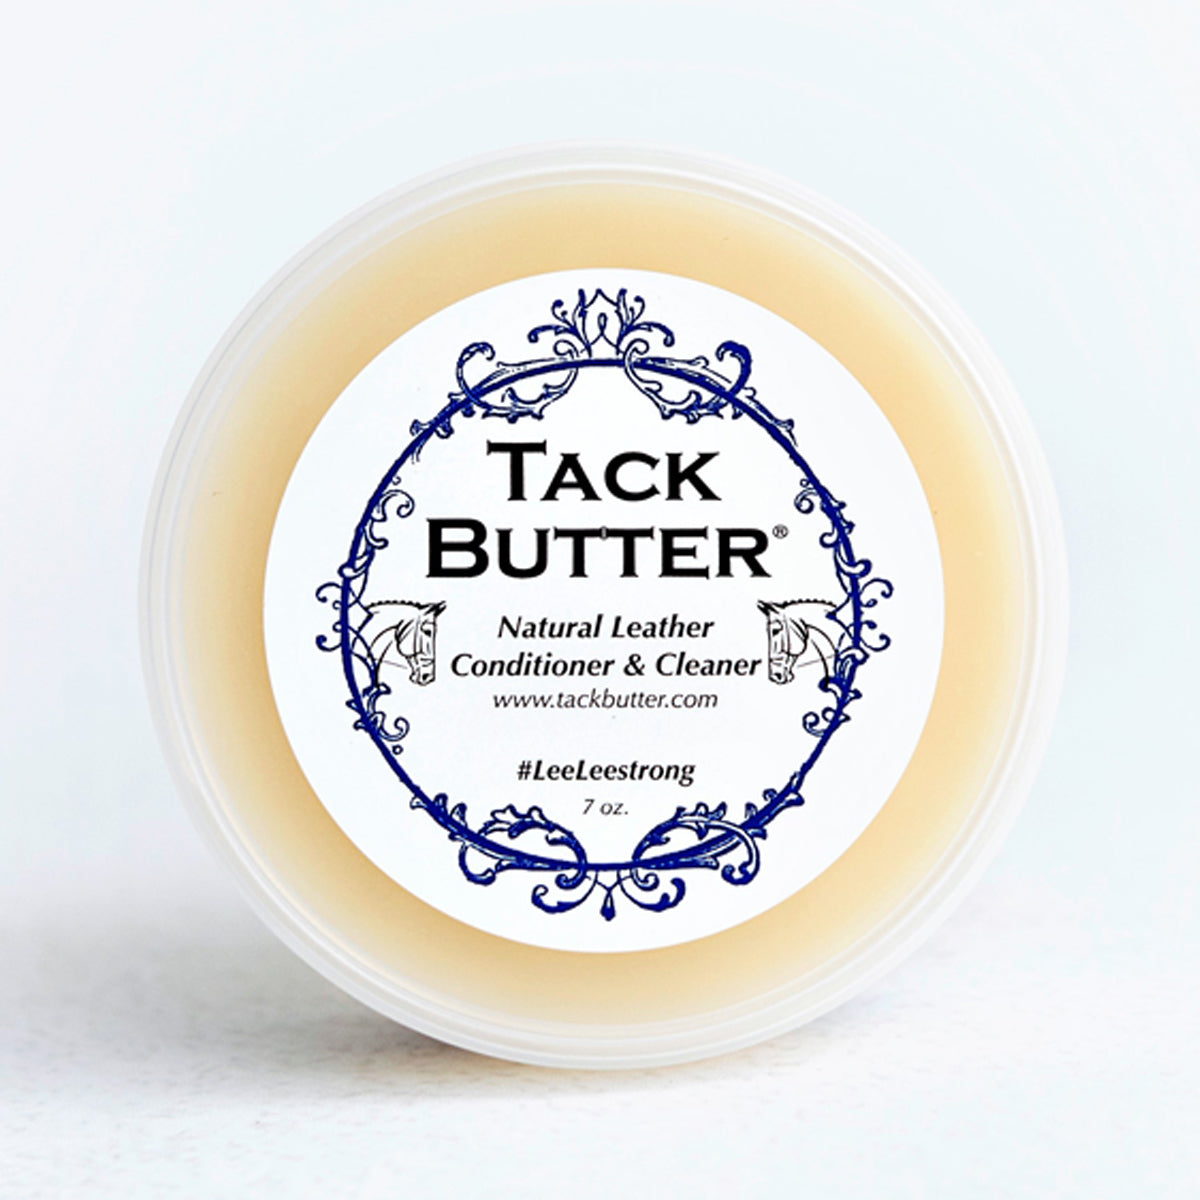 Tack Butter Lavender & Eucalyptus Natural Leather Conditioner & Cleaner